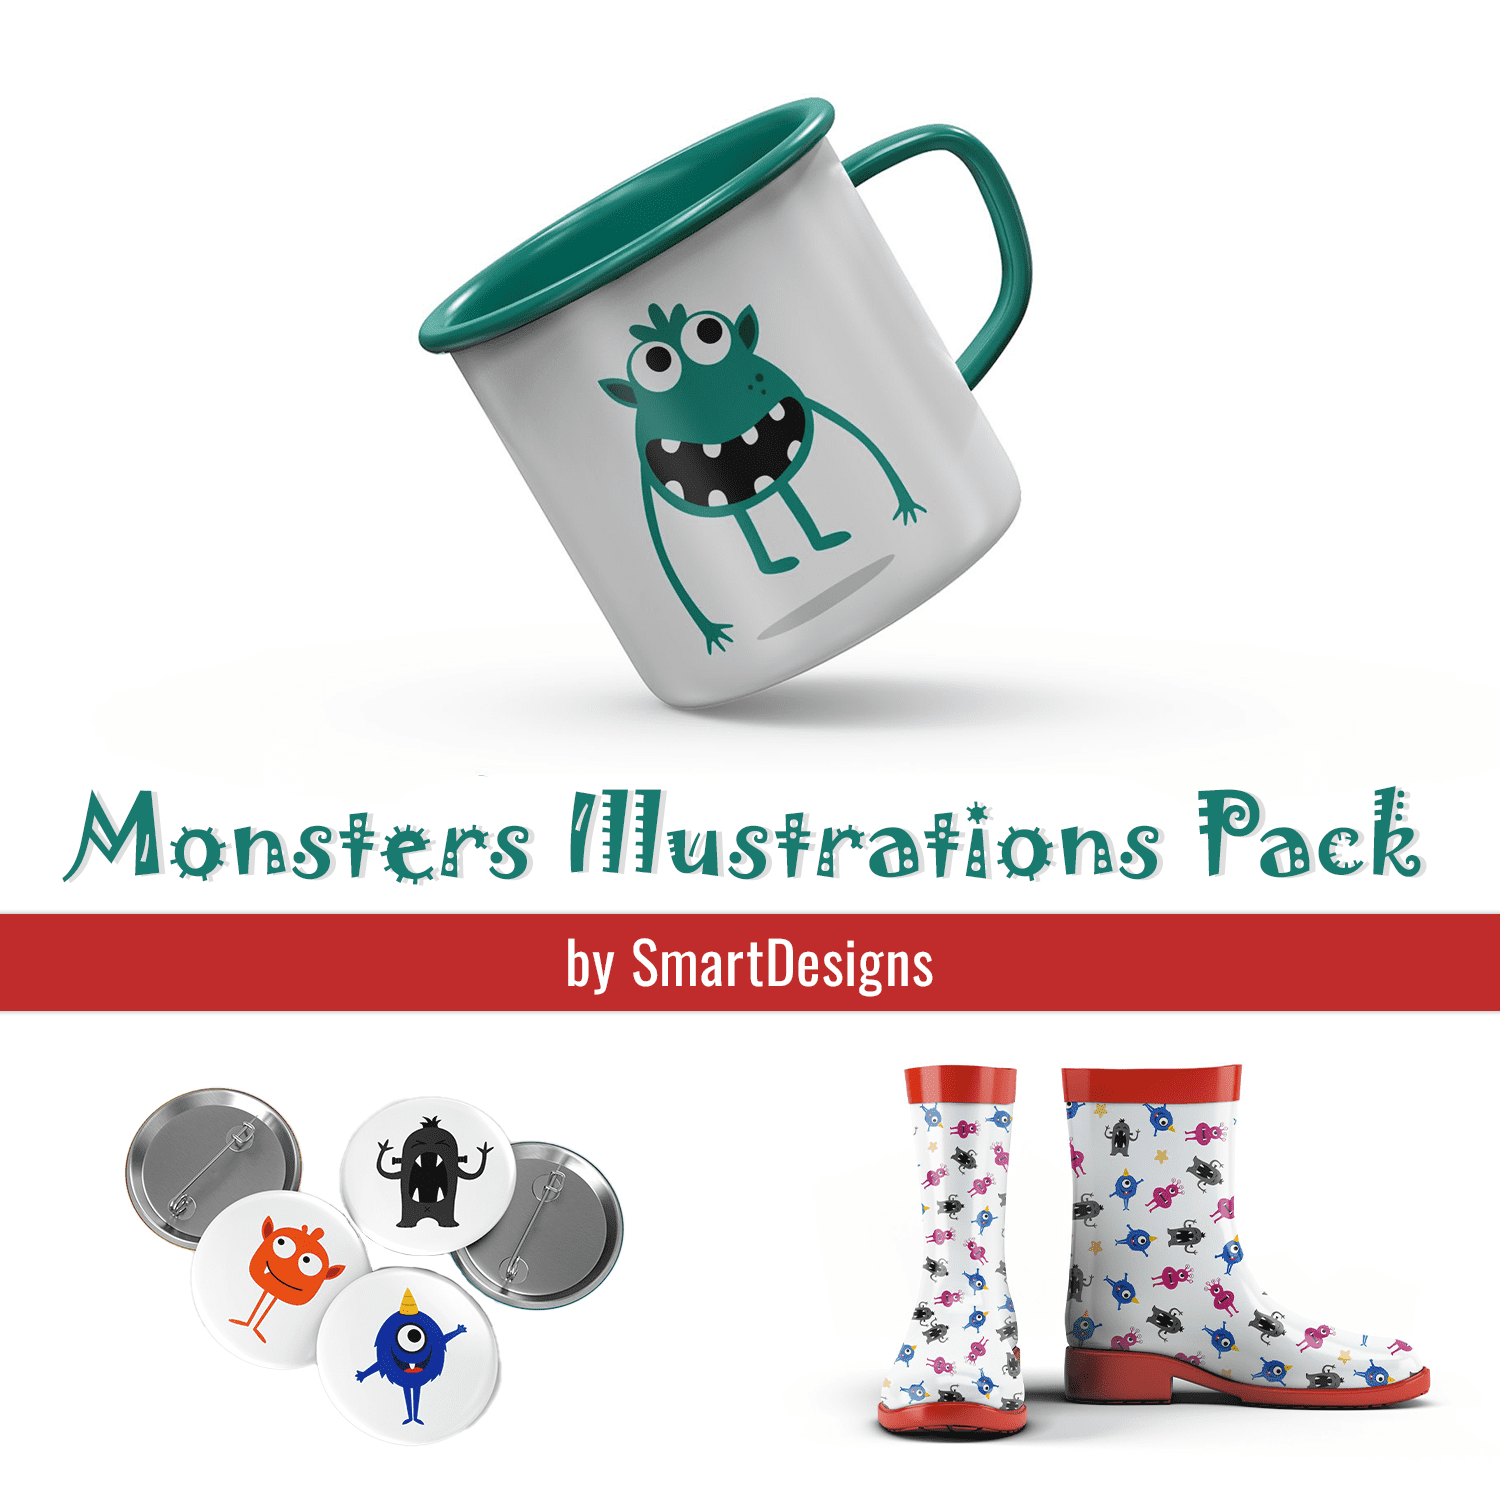 Preview monsters illustrations pack.